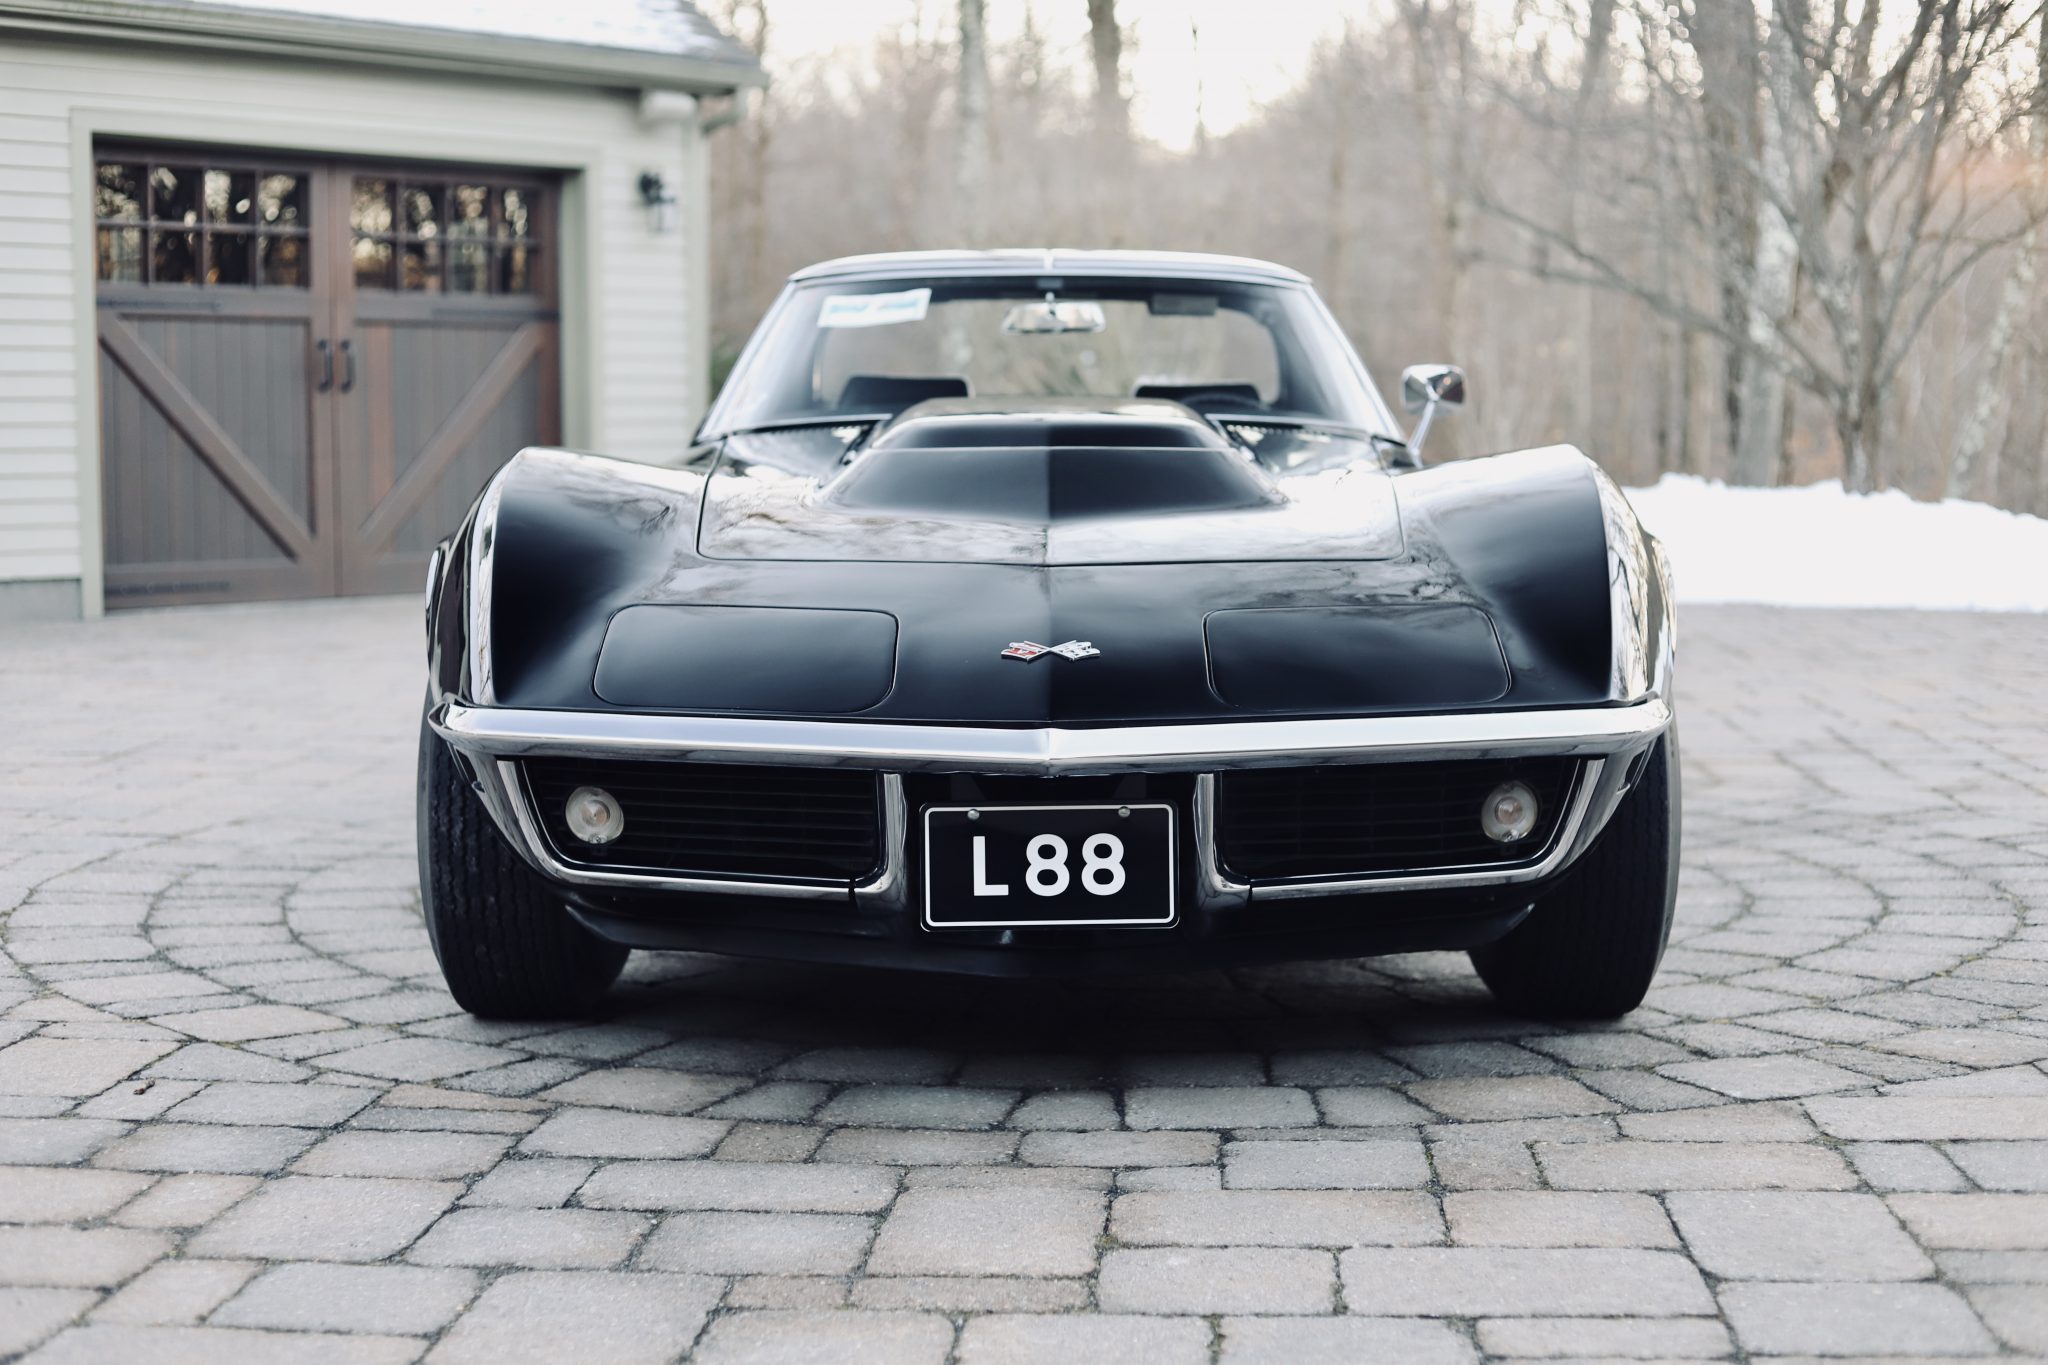 1969 Chevy Corvette L88 Snatching $610k Shows Insanity of No Reserve Auctio...